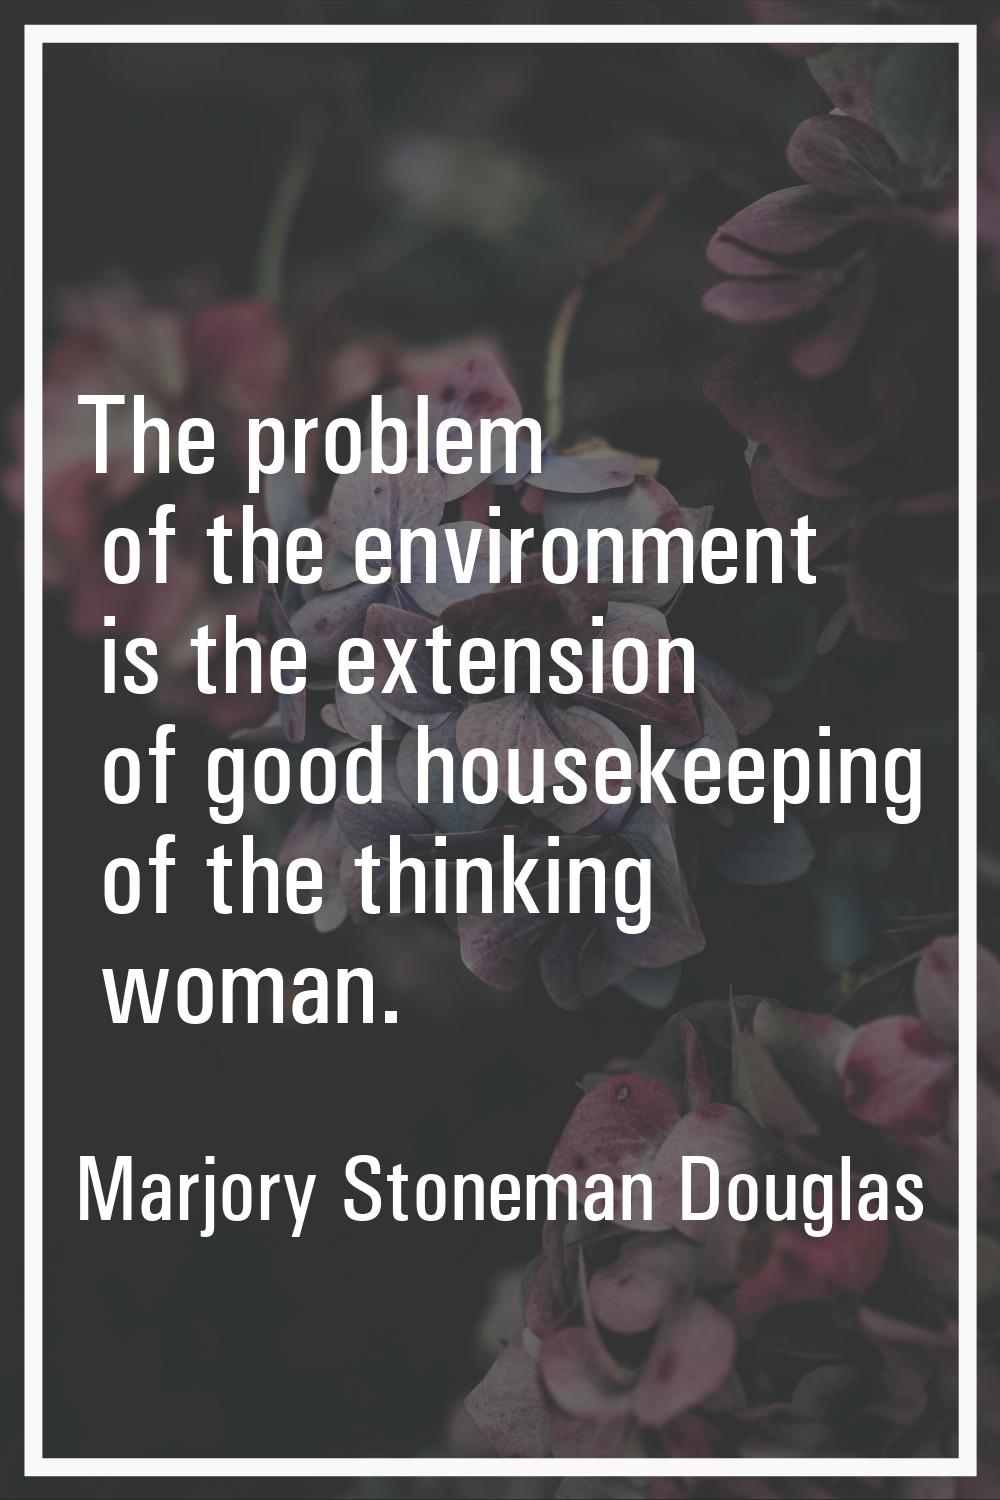 The problem of the environment is the extension of good housekeeping of the thinking woman.